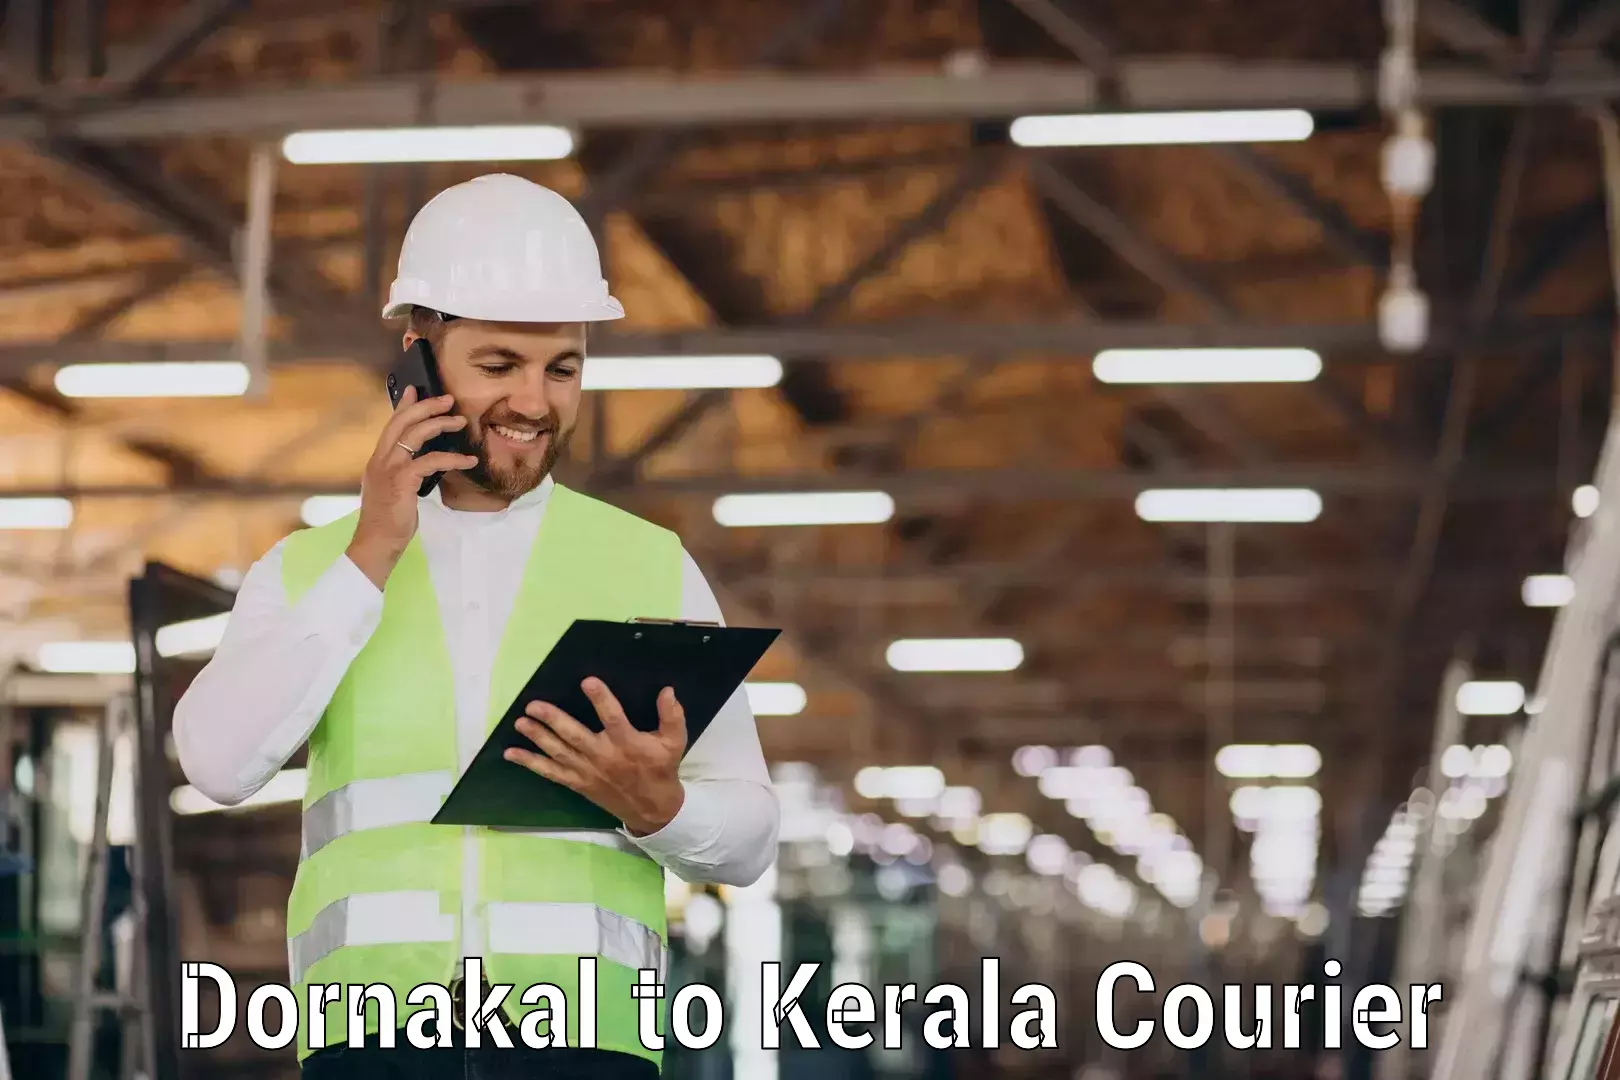 Multi-national courier services Dornakal to Cochin Port Kochi